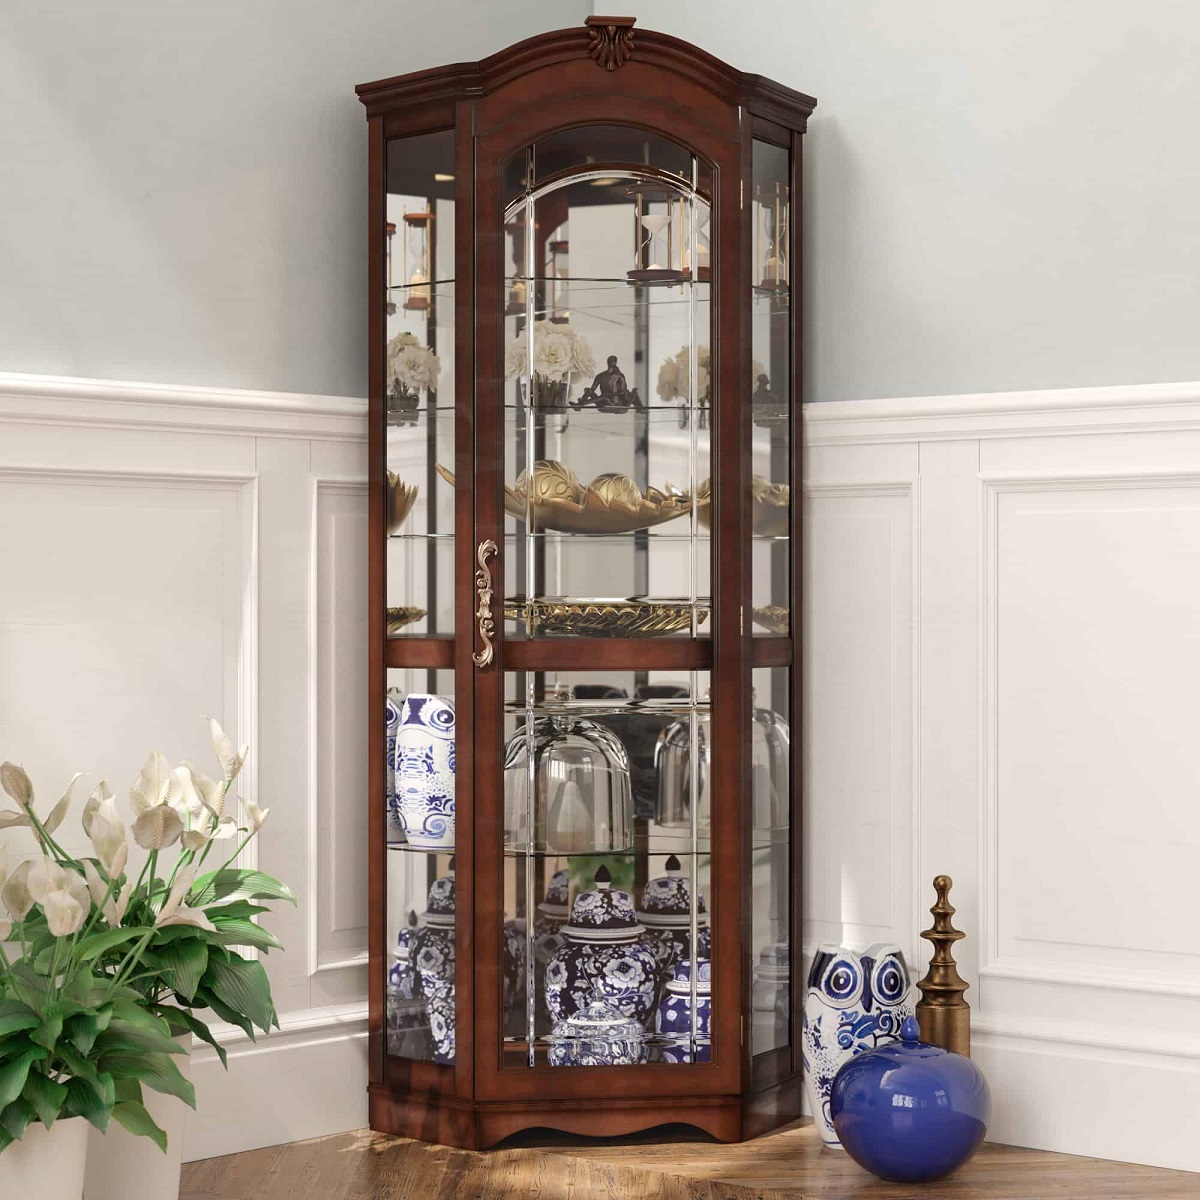 What To Put In Curio Cabinet